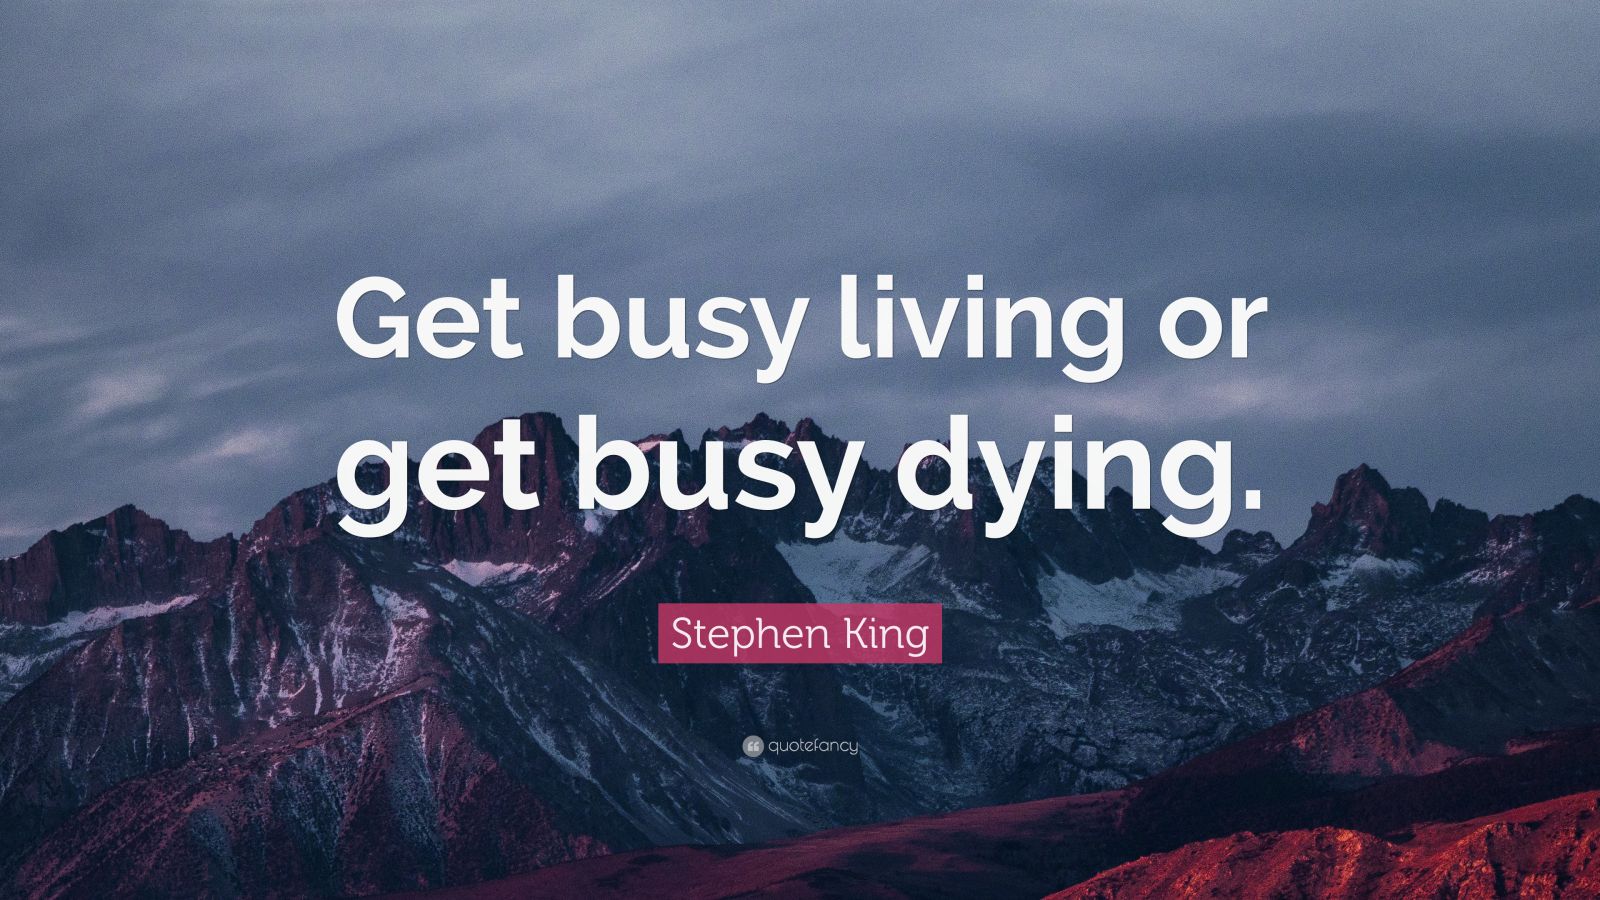 Stephen King Quote: "Get busy living or get busy dying." (24 wallpapers) - Quotefancy